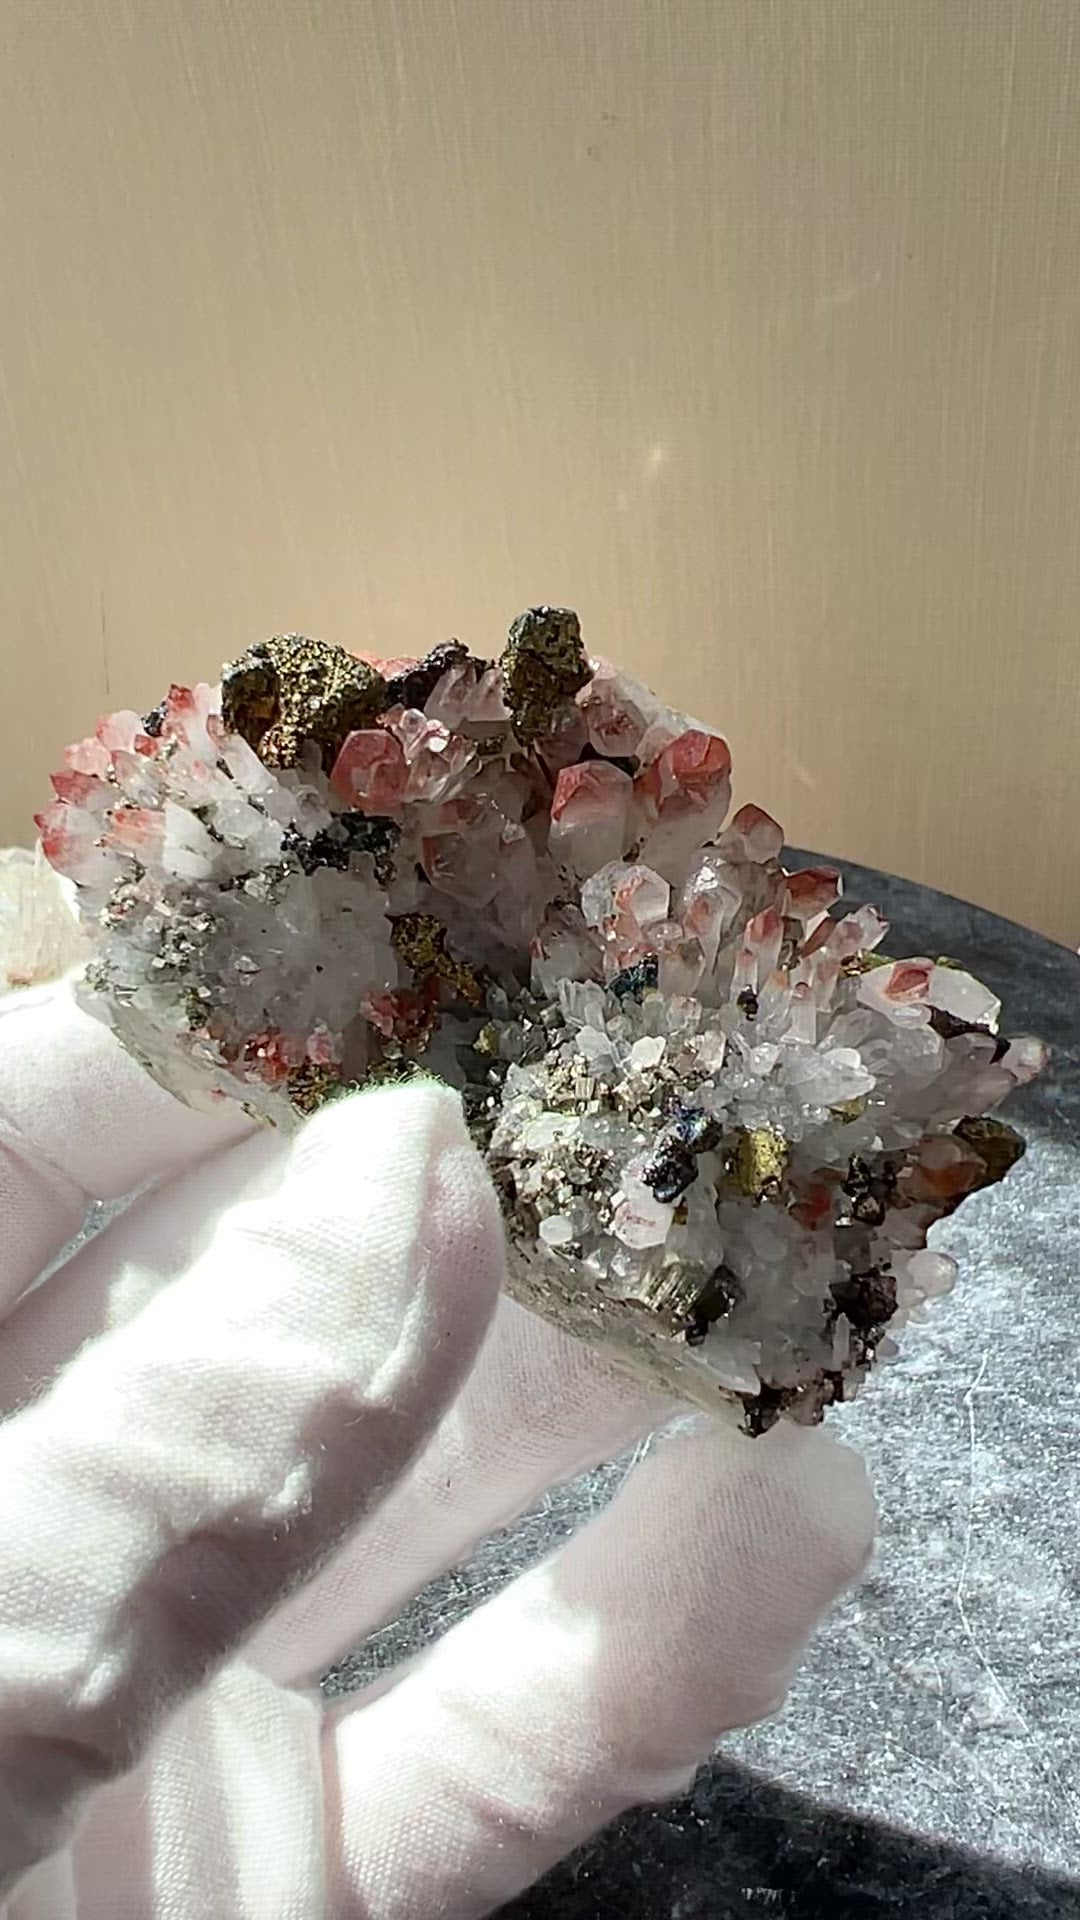 Hematite Red Tip Clear Quartz with Pyrite (A)